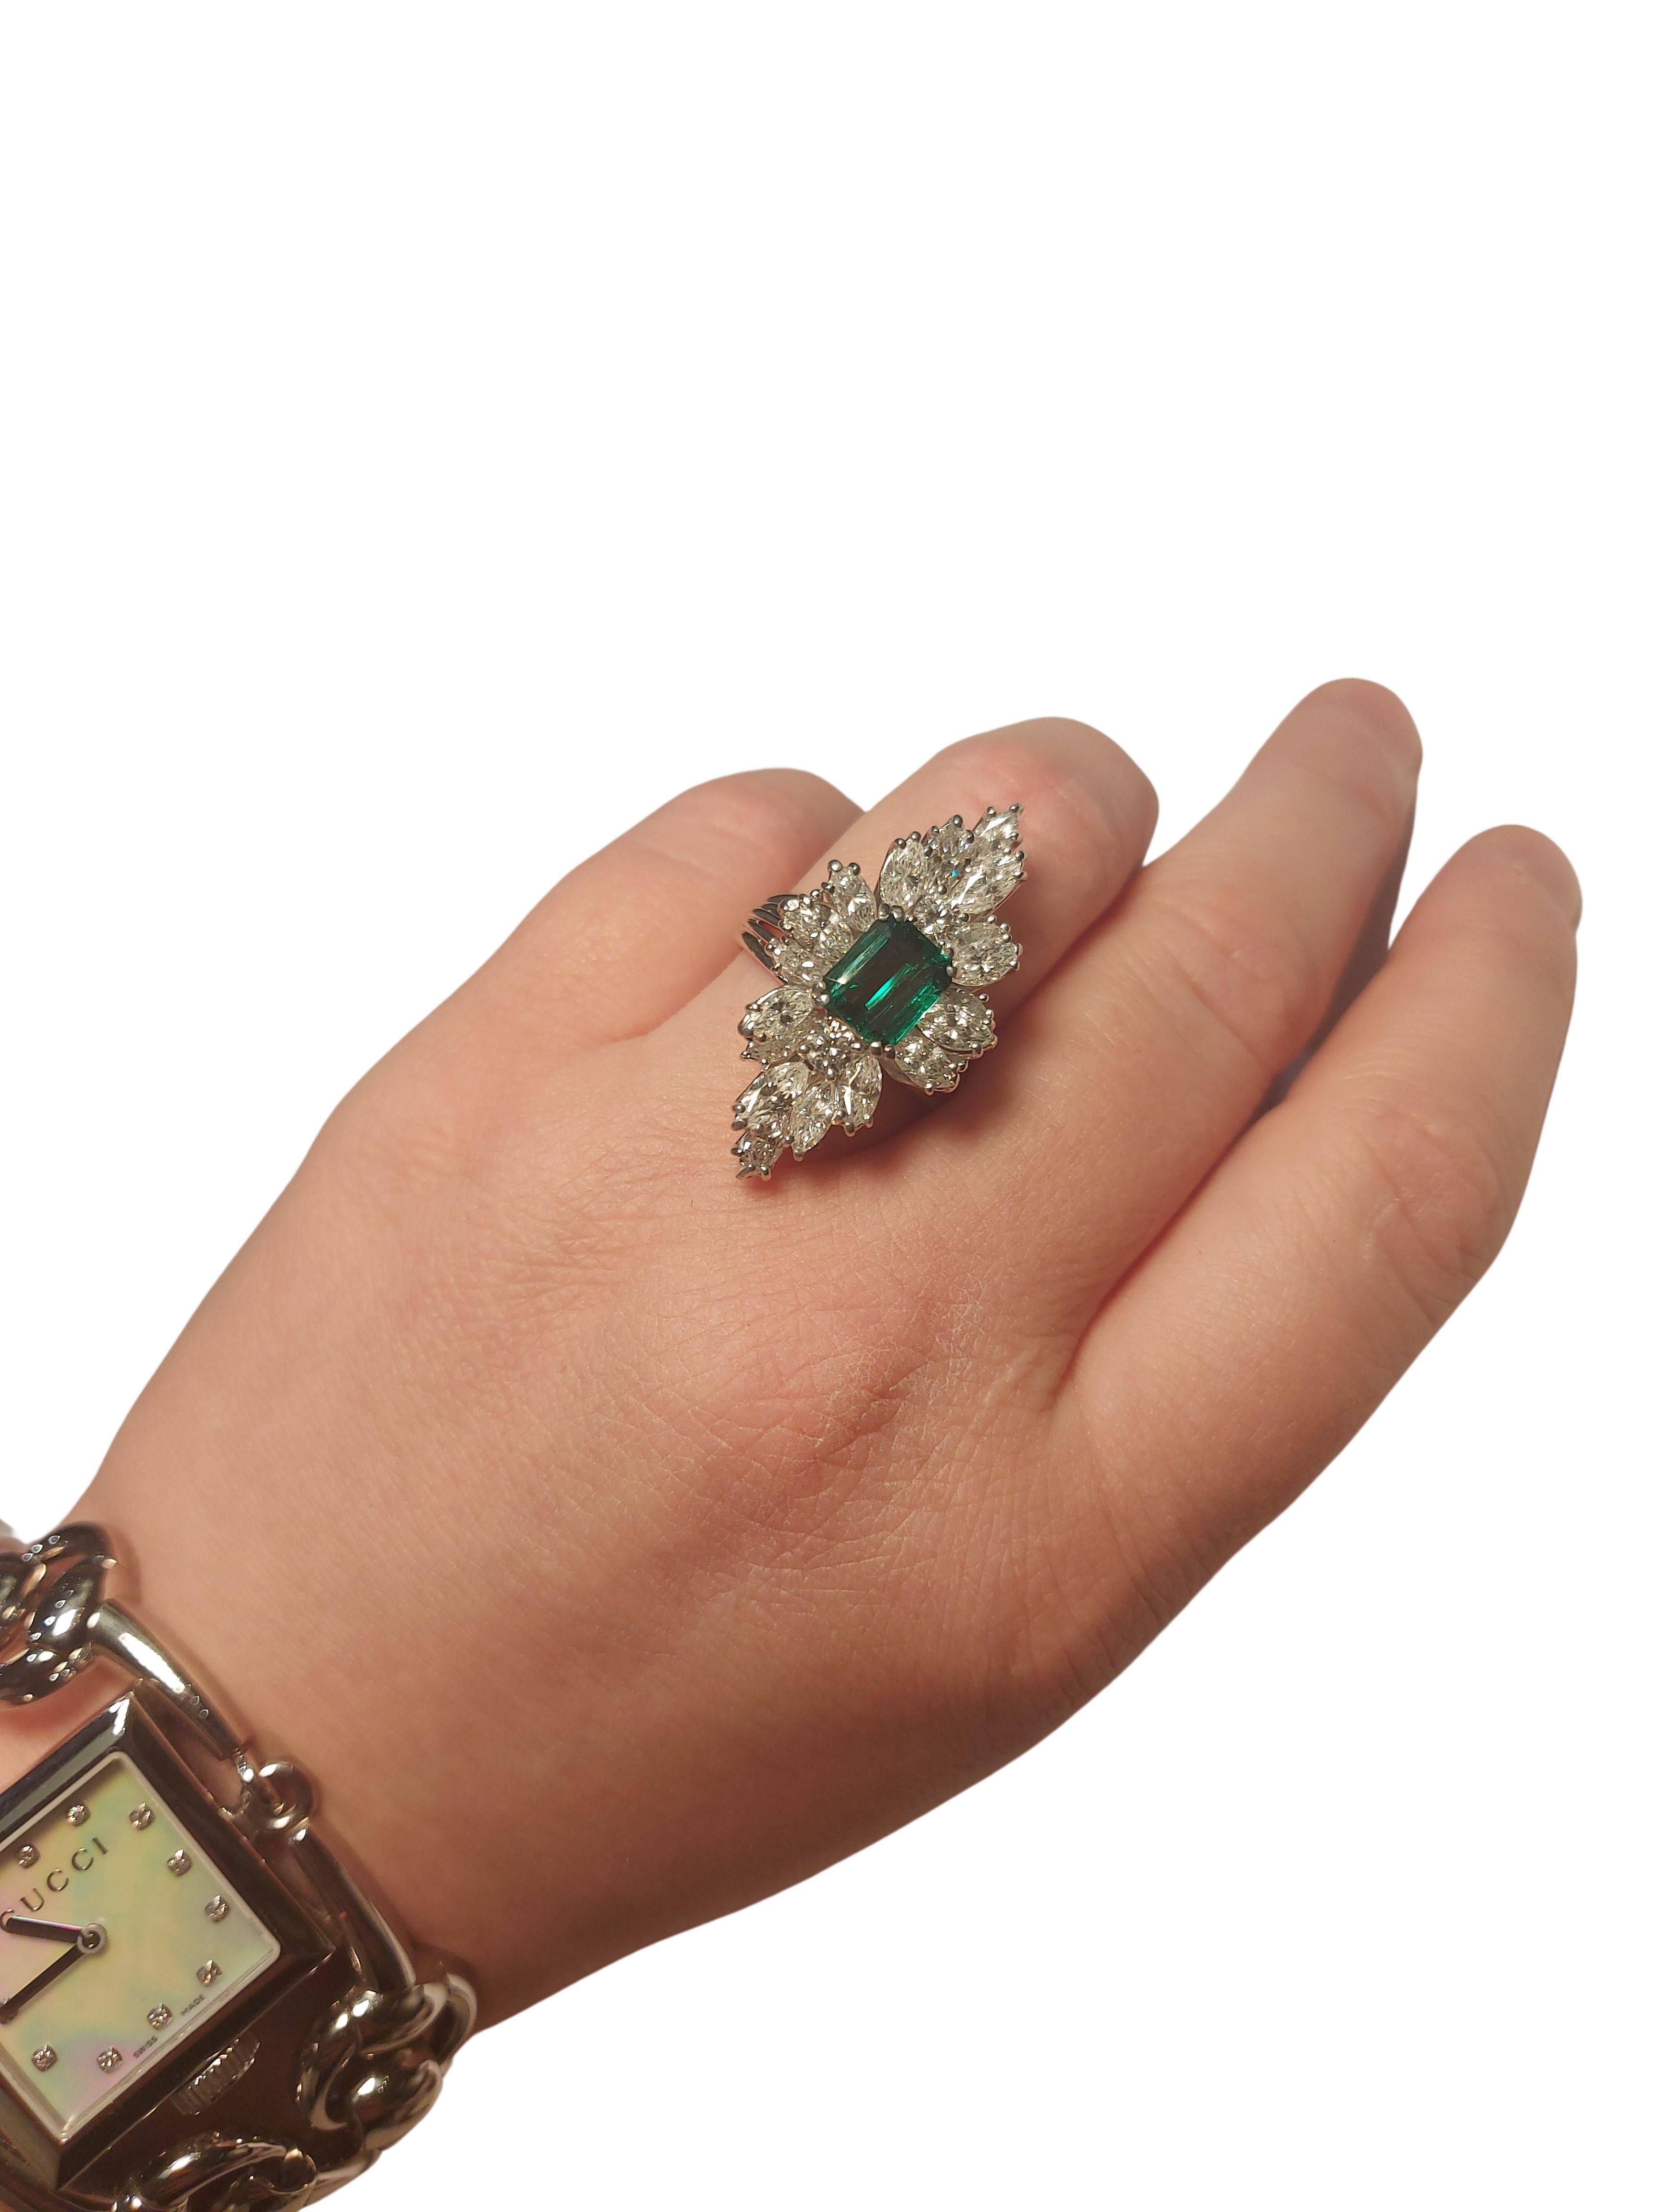 18kt White Gold Ring with 1.49 Ct Emerald Stone Surrounded by Diamonds For Sale 6